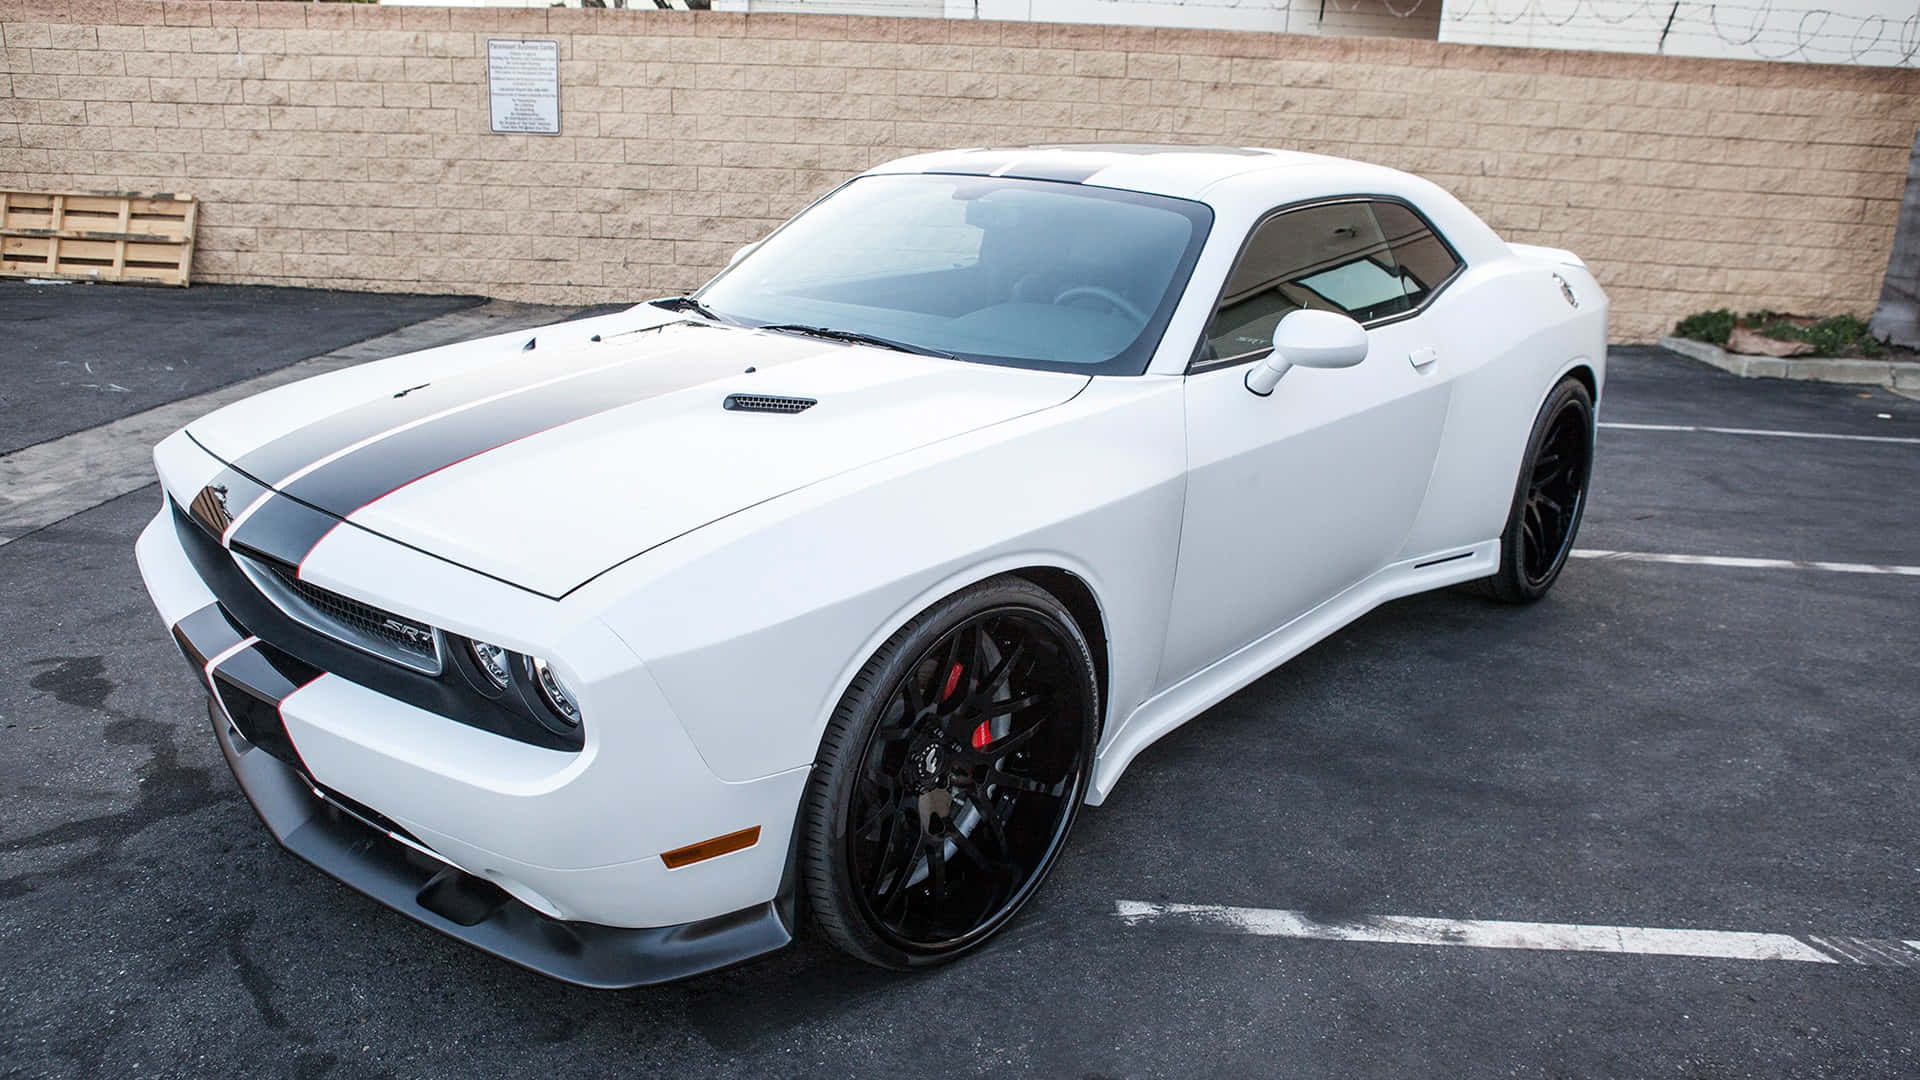 Feel The Ultimate Power Of The Dodge Challenger Hellcat! Background